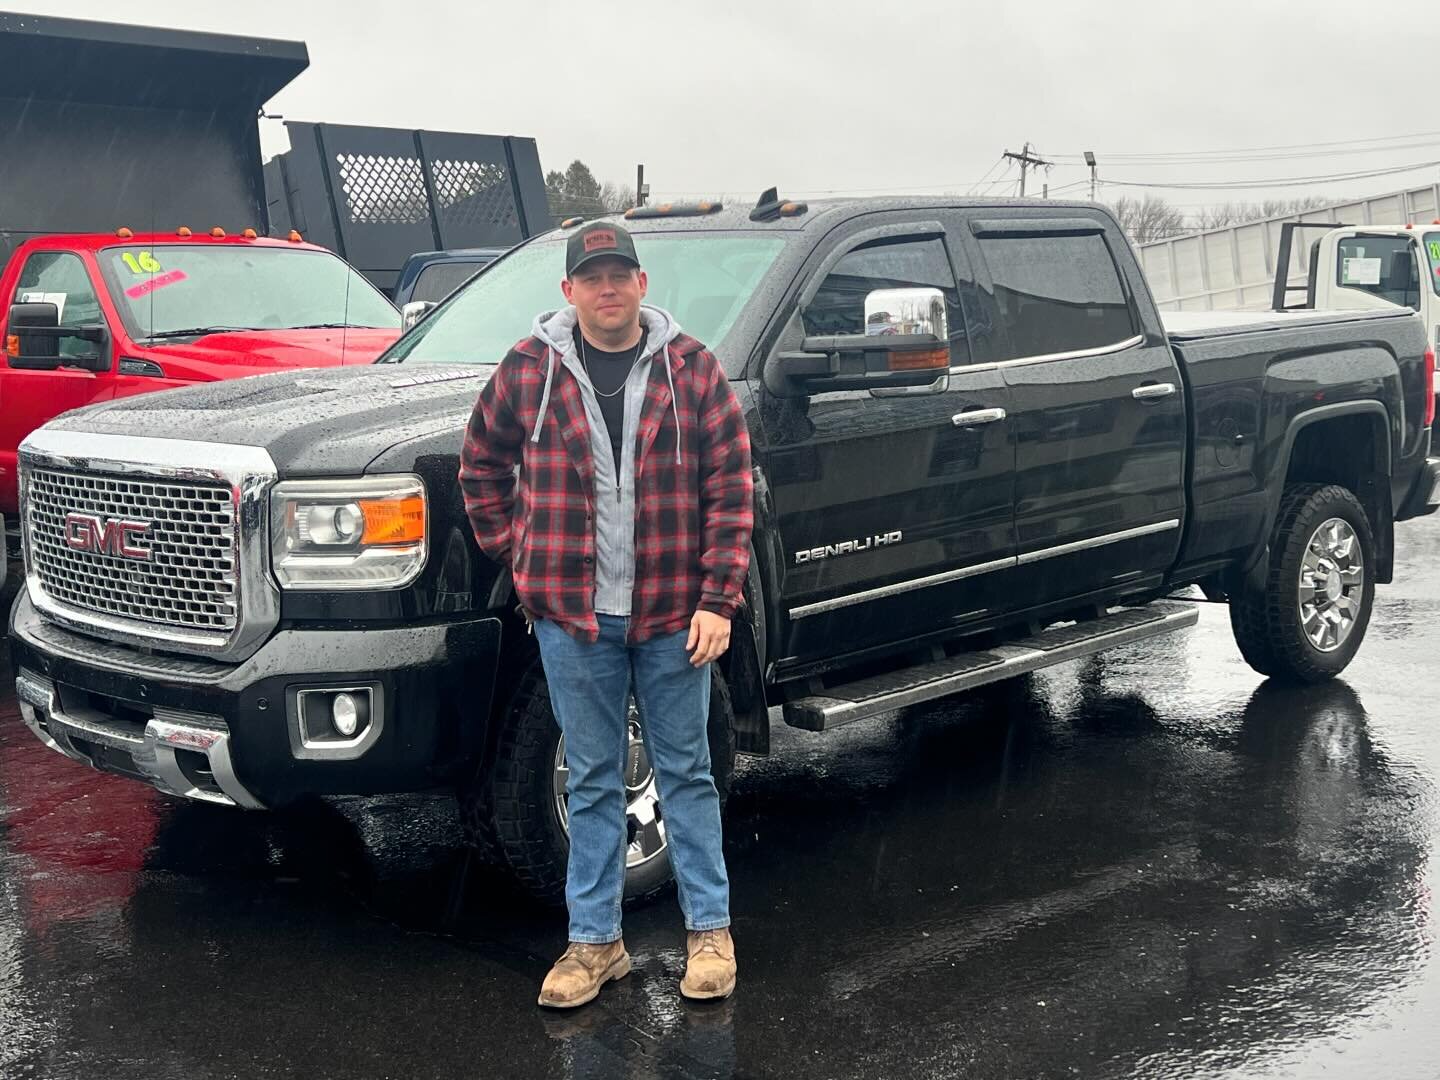 Congrats to Doug from Sellersville, PA on the 2015 GMC Sierra 2500HD Denali Diesel. We appreciate you traveling in these conditions, enjoy the truck 🛻